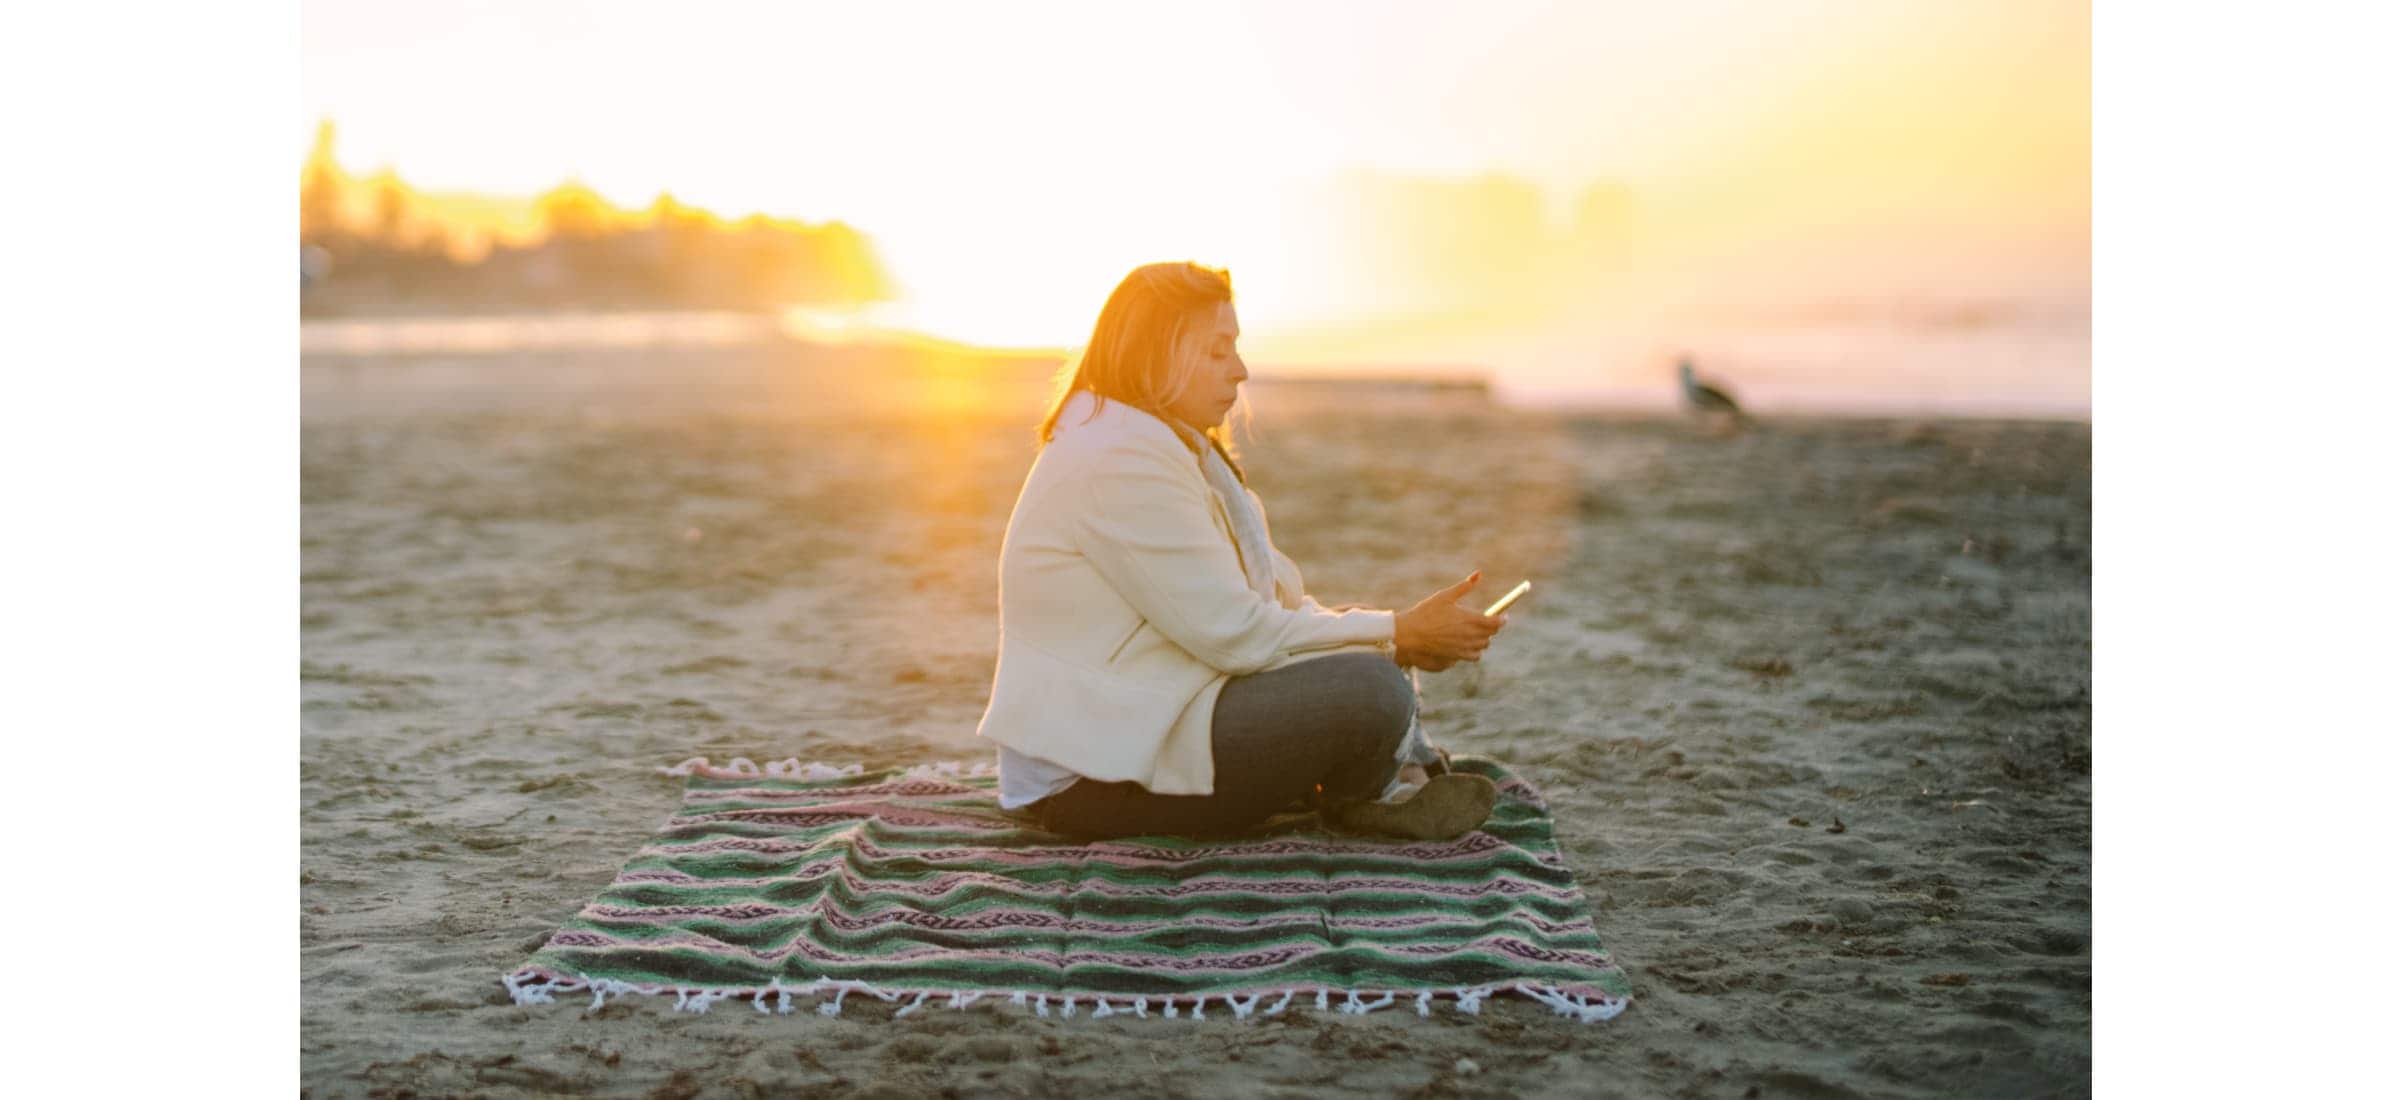 Nury sits on a San Diego beach at sunset with her phone in hand.